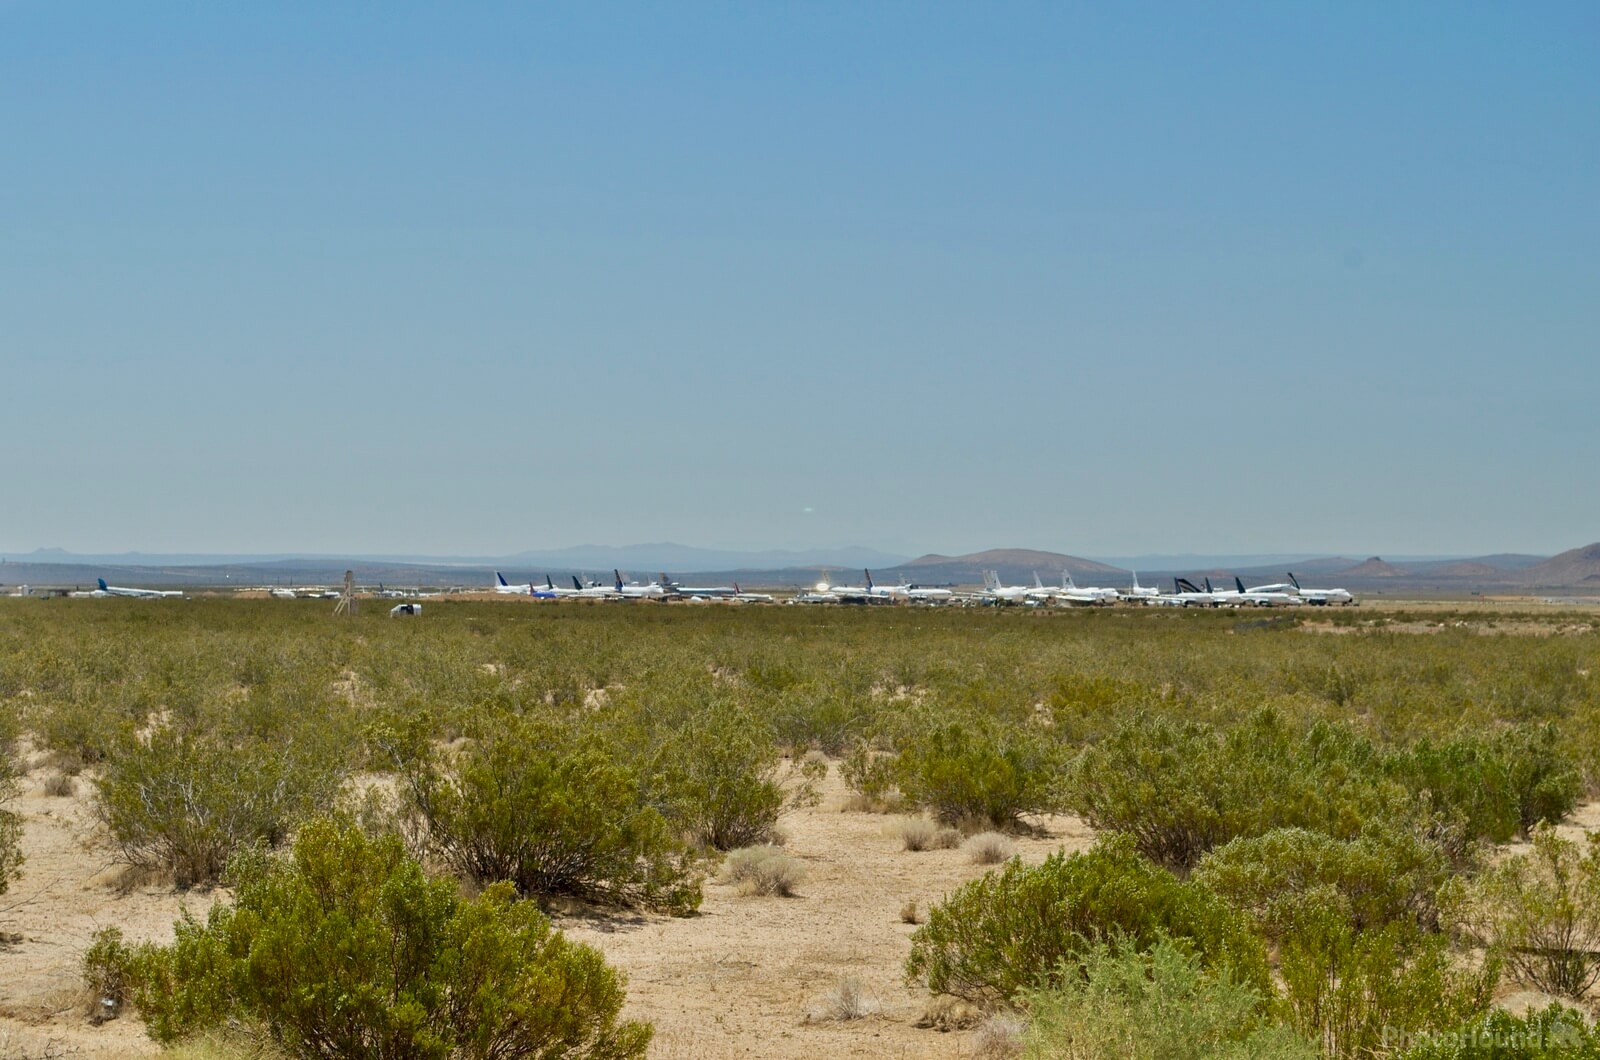 Image of Mojave Airport Airline Storage by Steve West